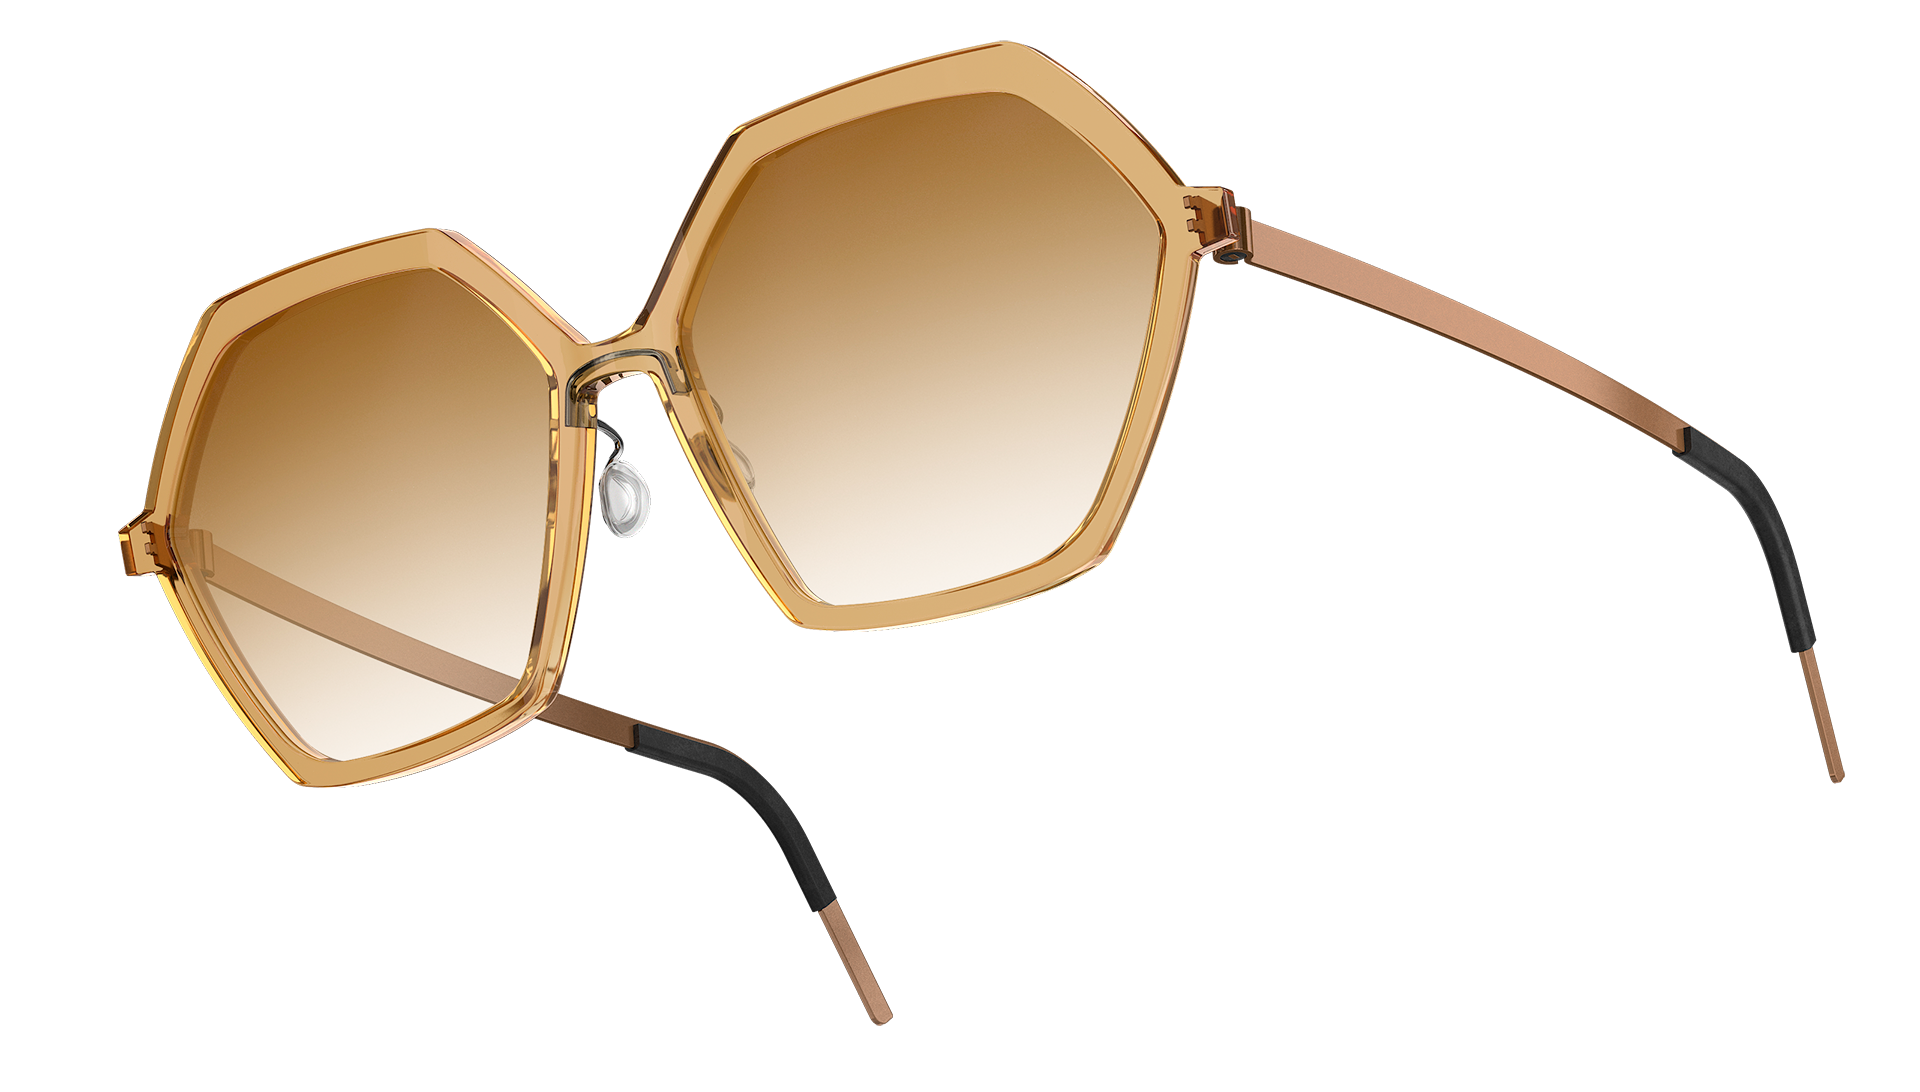 LINDBERG model 8588 transparent acetate sunglasses in a geometric shape with brown gradient tint lenses and titanium temples